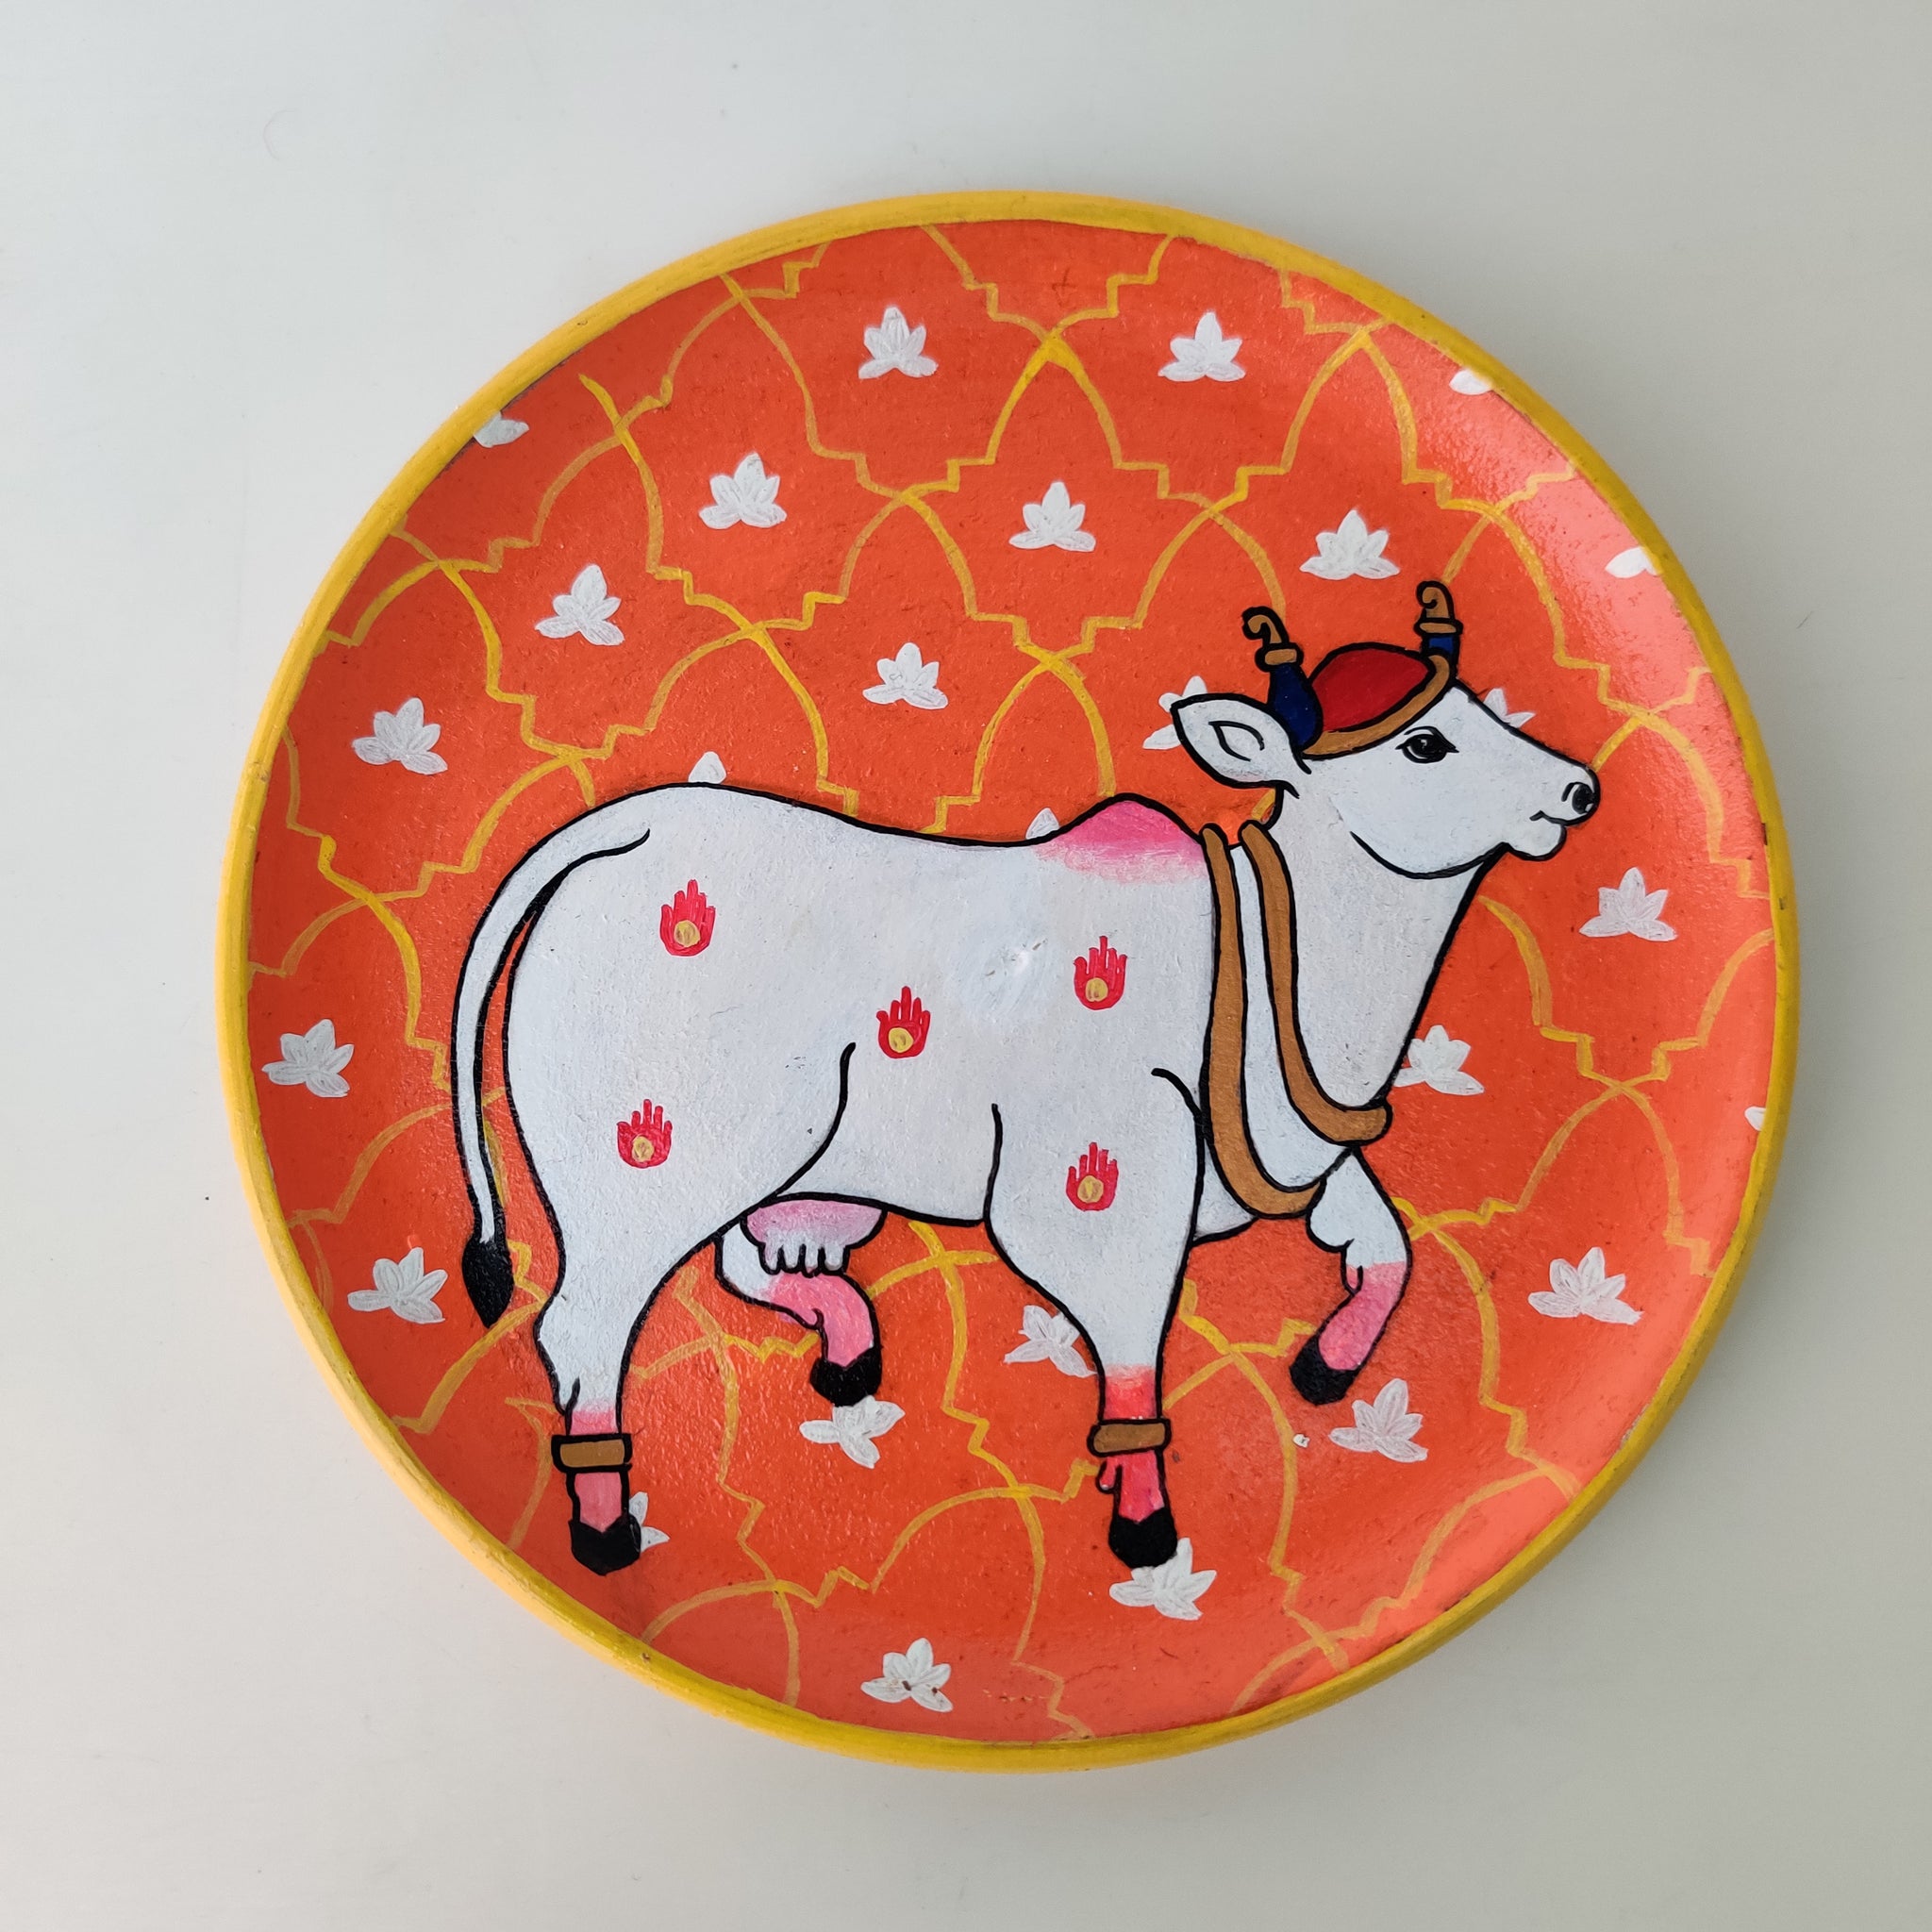 Orange & White Traditional Cow Hand-painted Wall Plate (Diameter - 10 inches)